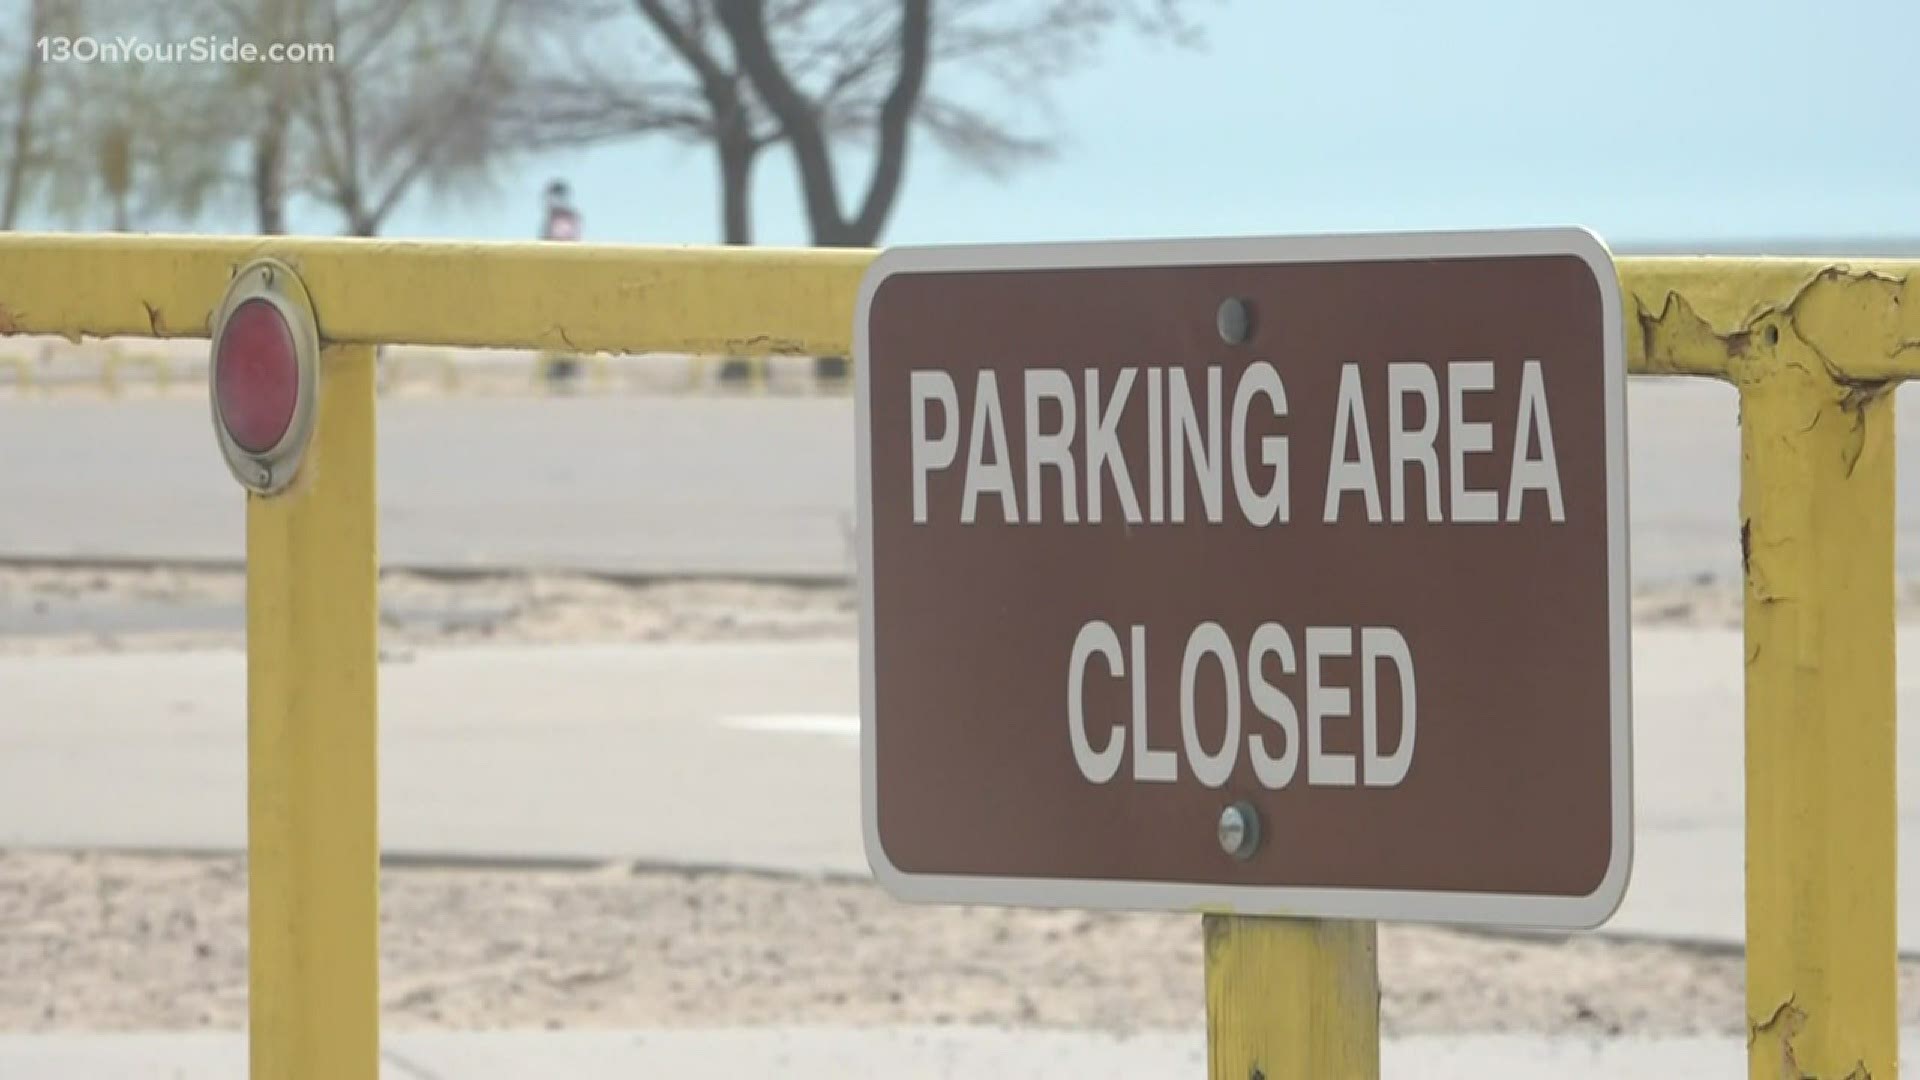 Because people gathered in the state park parking lot without following social distancing, the lot has been closed down.